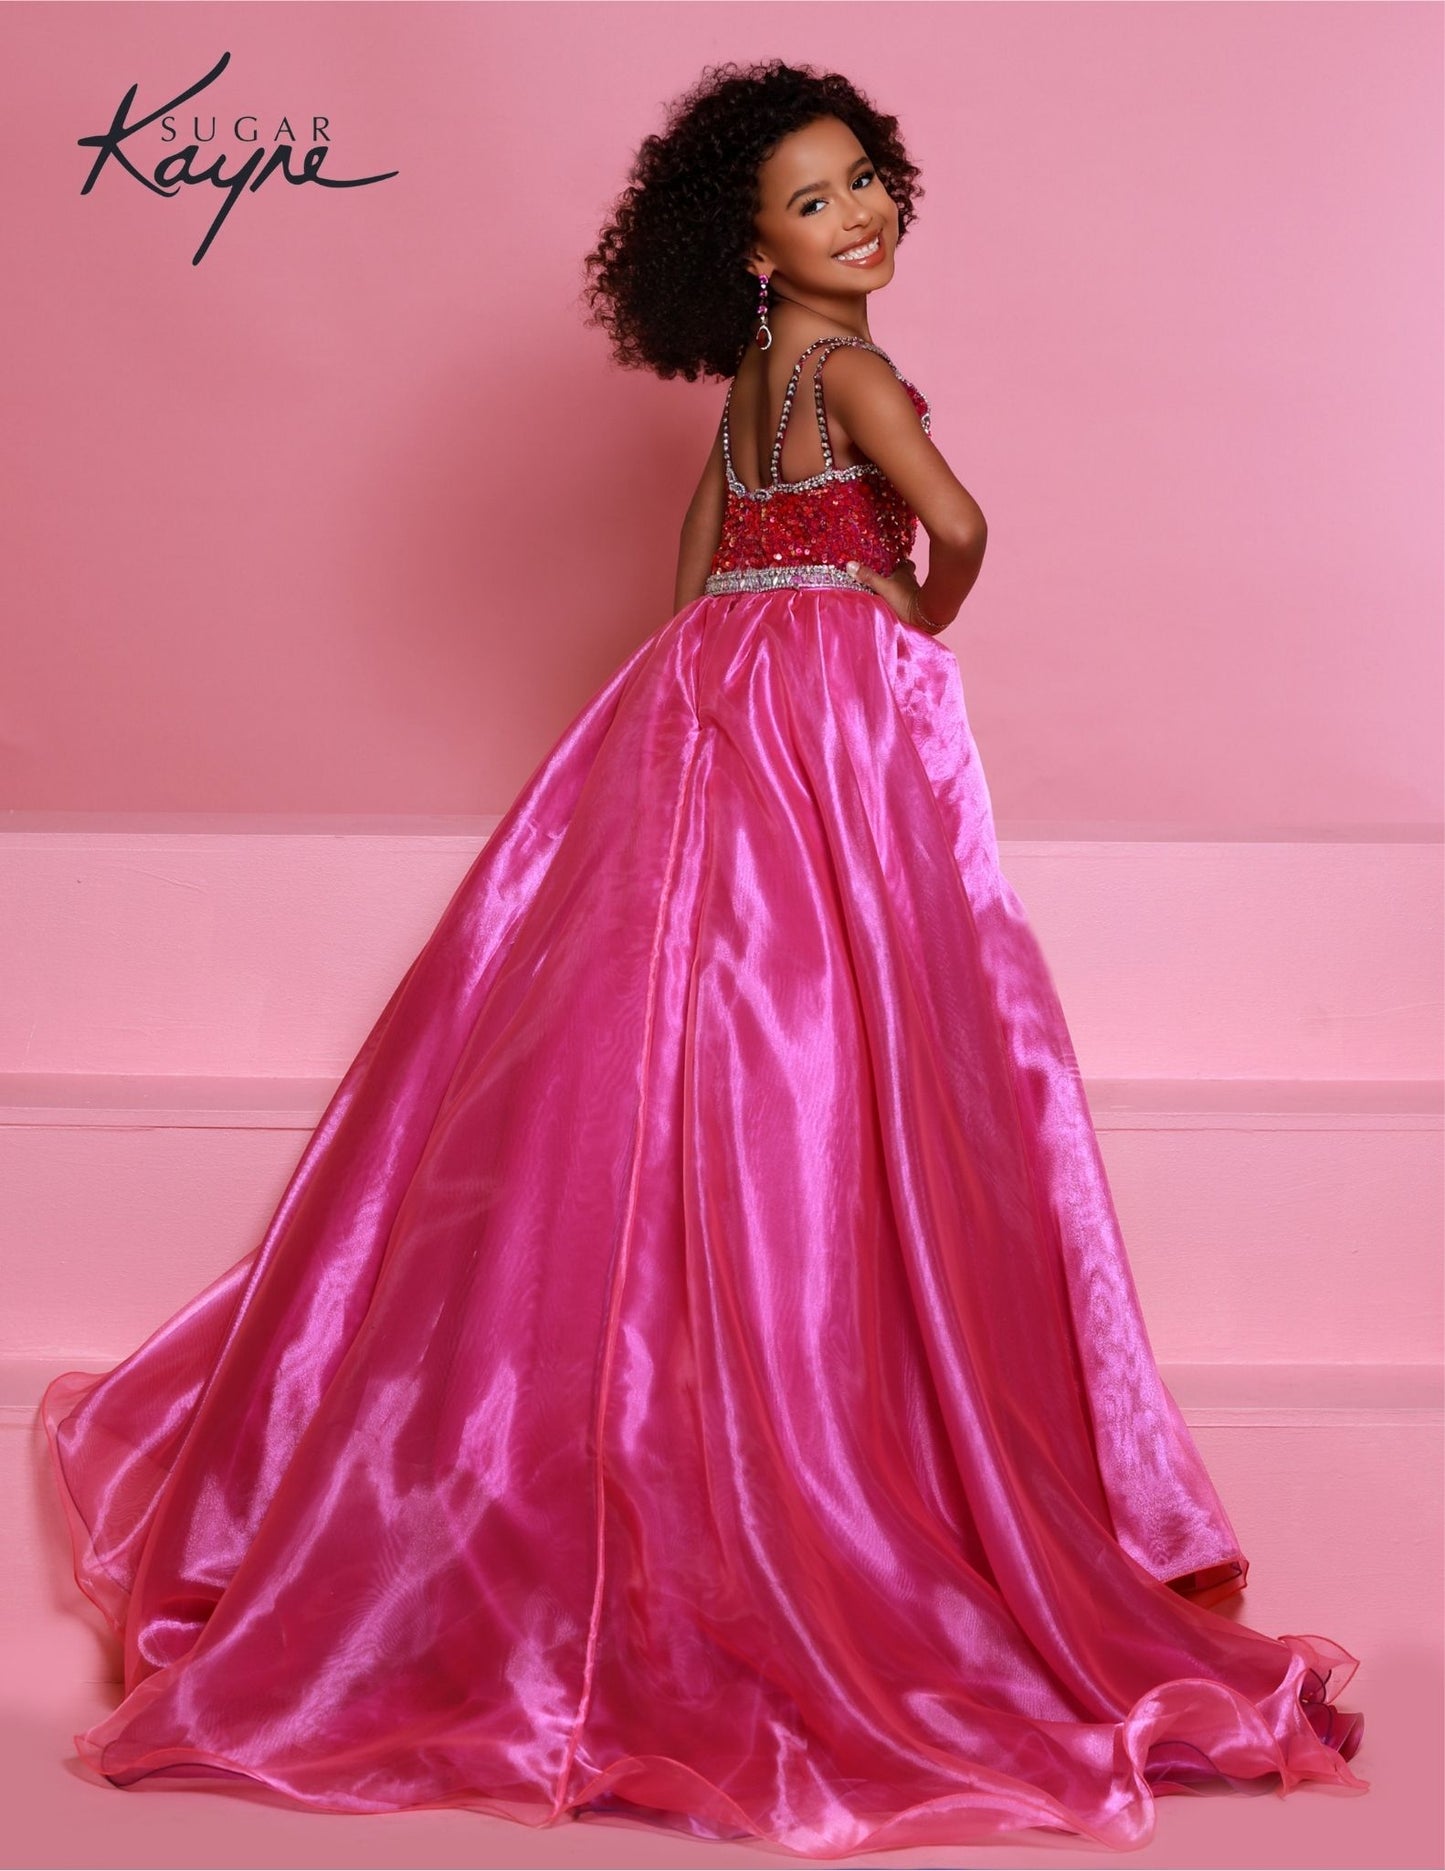 Sugar Kayne C332 offers a unique sequined jumpsuit style for girls and preteens with its fun fashion detachable overskirt and halter neckline on magenta stretch sequin velvet. 